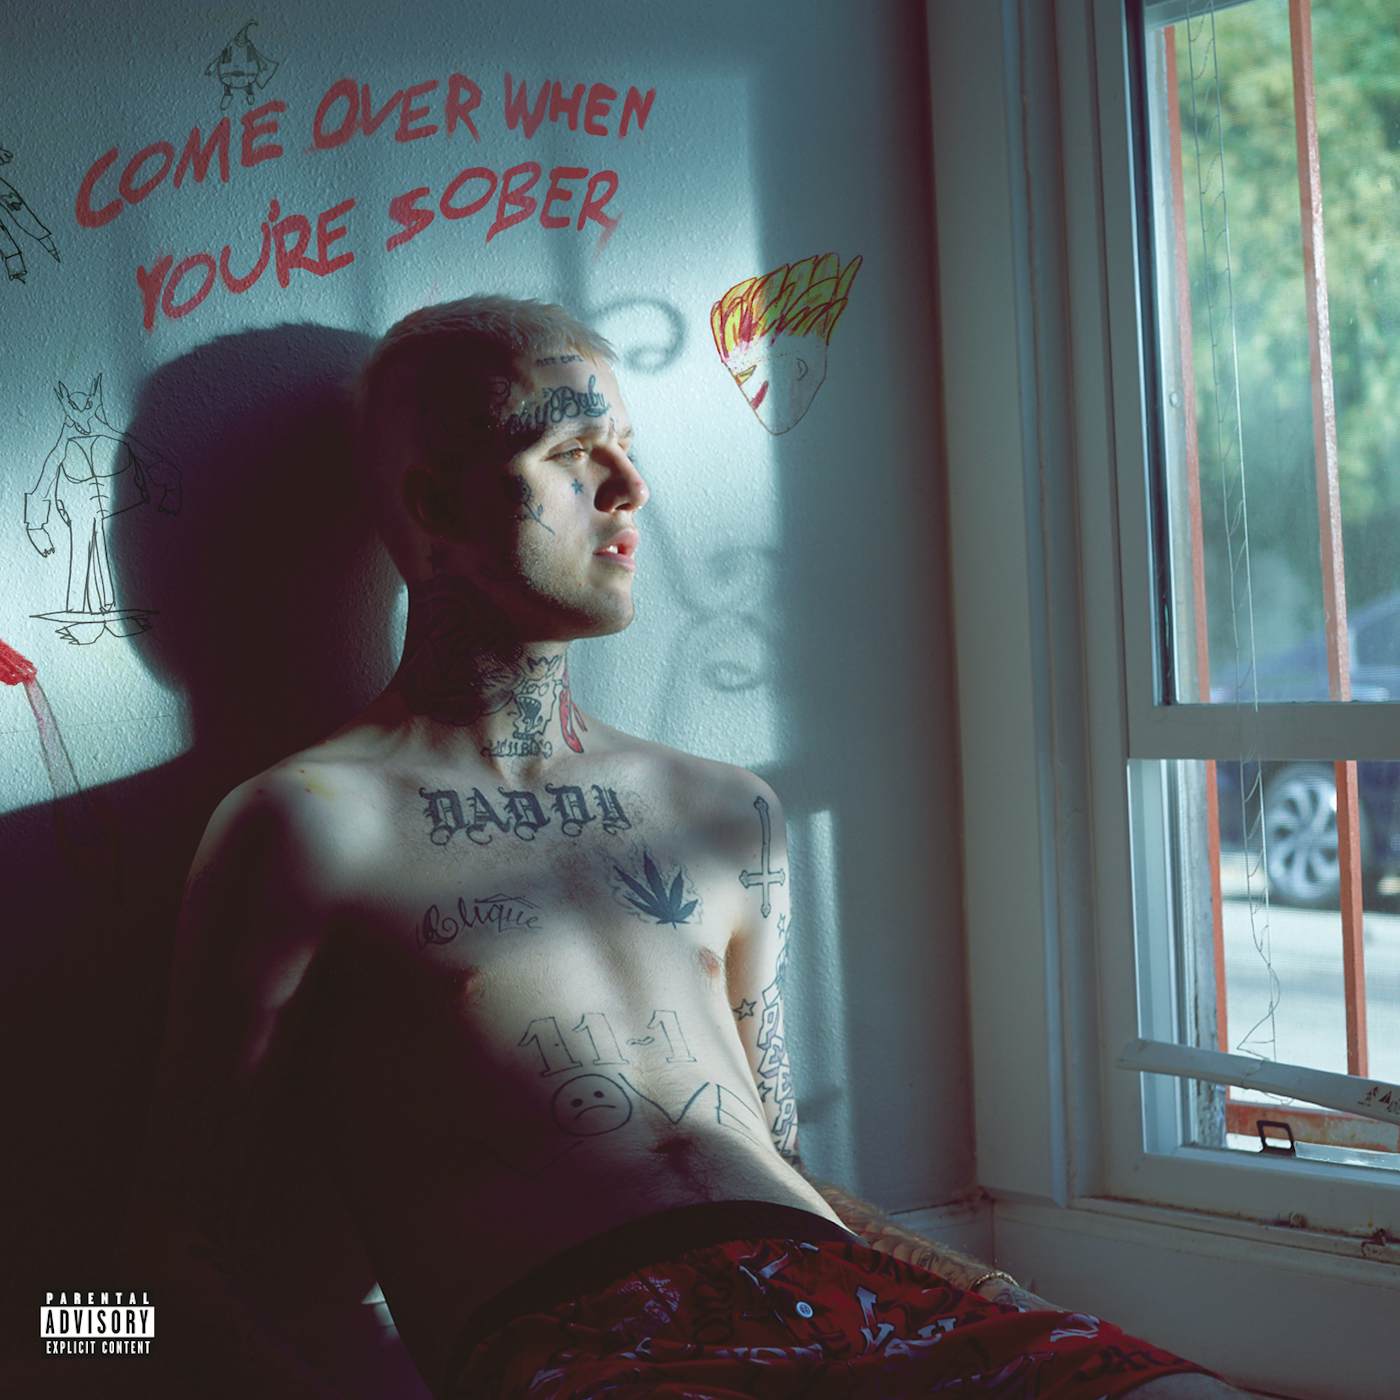 Lil Peep COME OVER WHEN YOU'RE SOBER PT 2 Vinyl Record